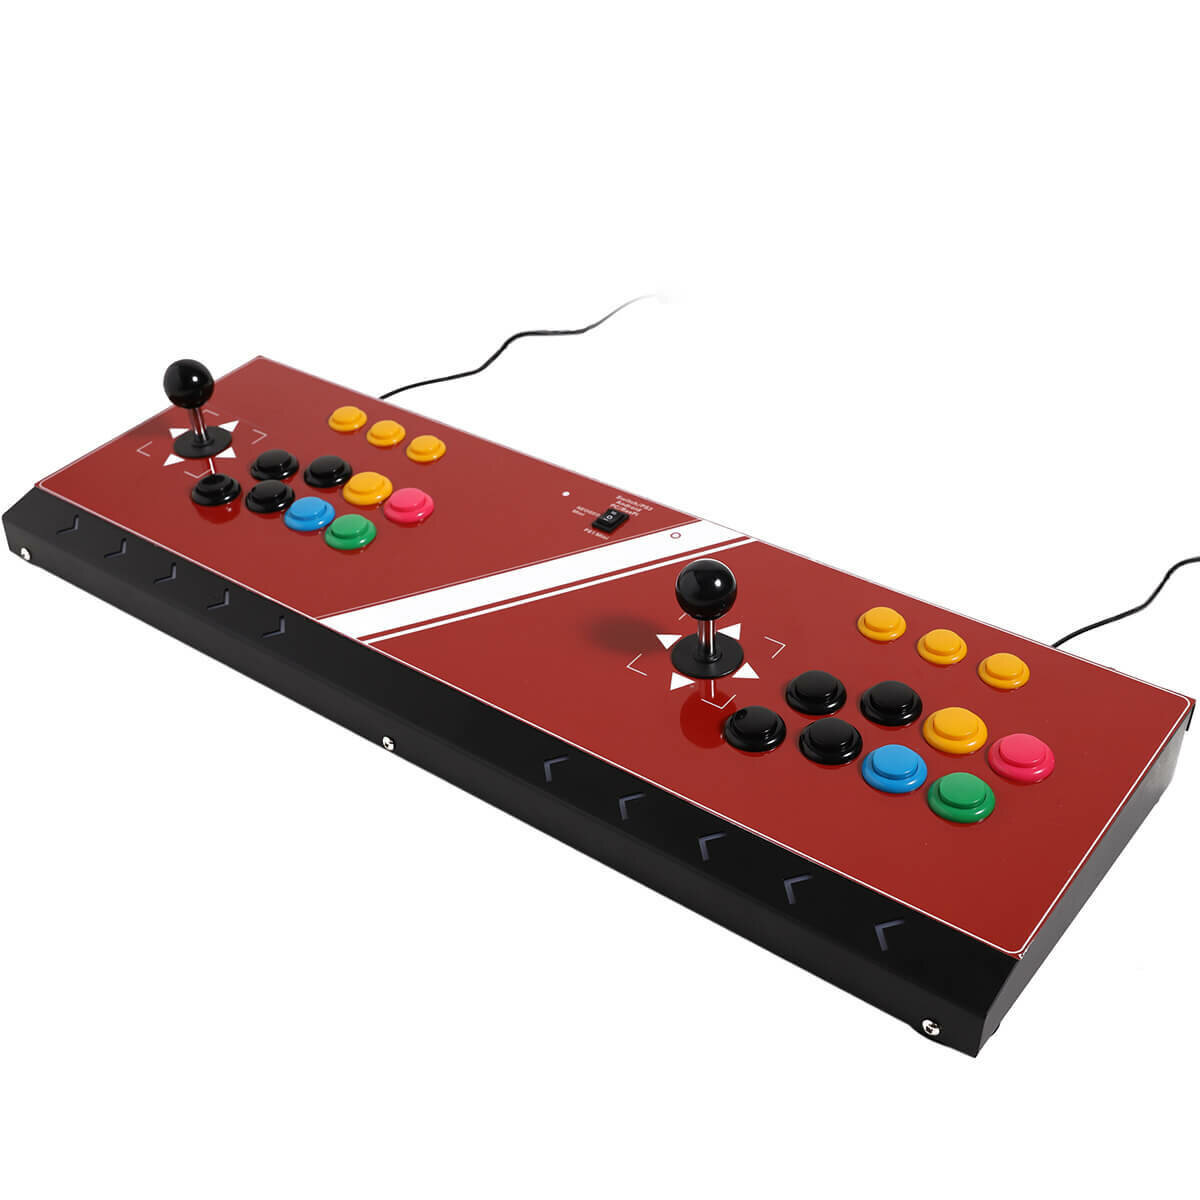 DOYO KT508 Arcade Game Controller Fighting Stick Game Console voor Nintendo Switch NEOGEO Mini PC PS